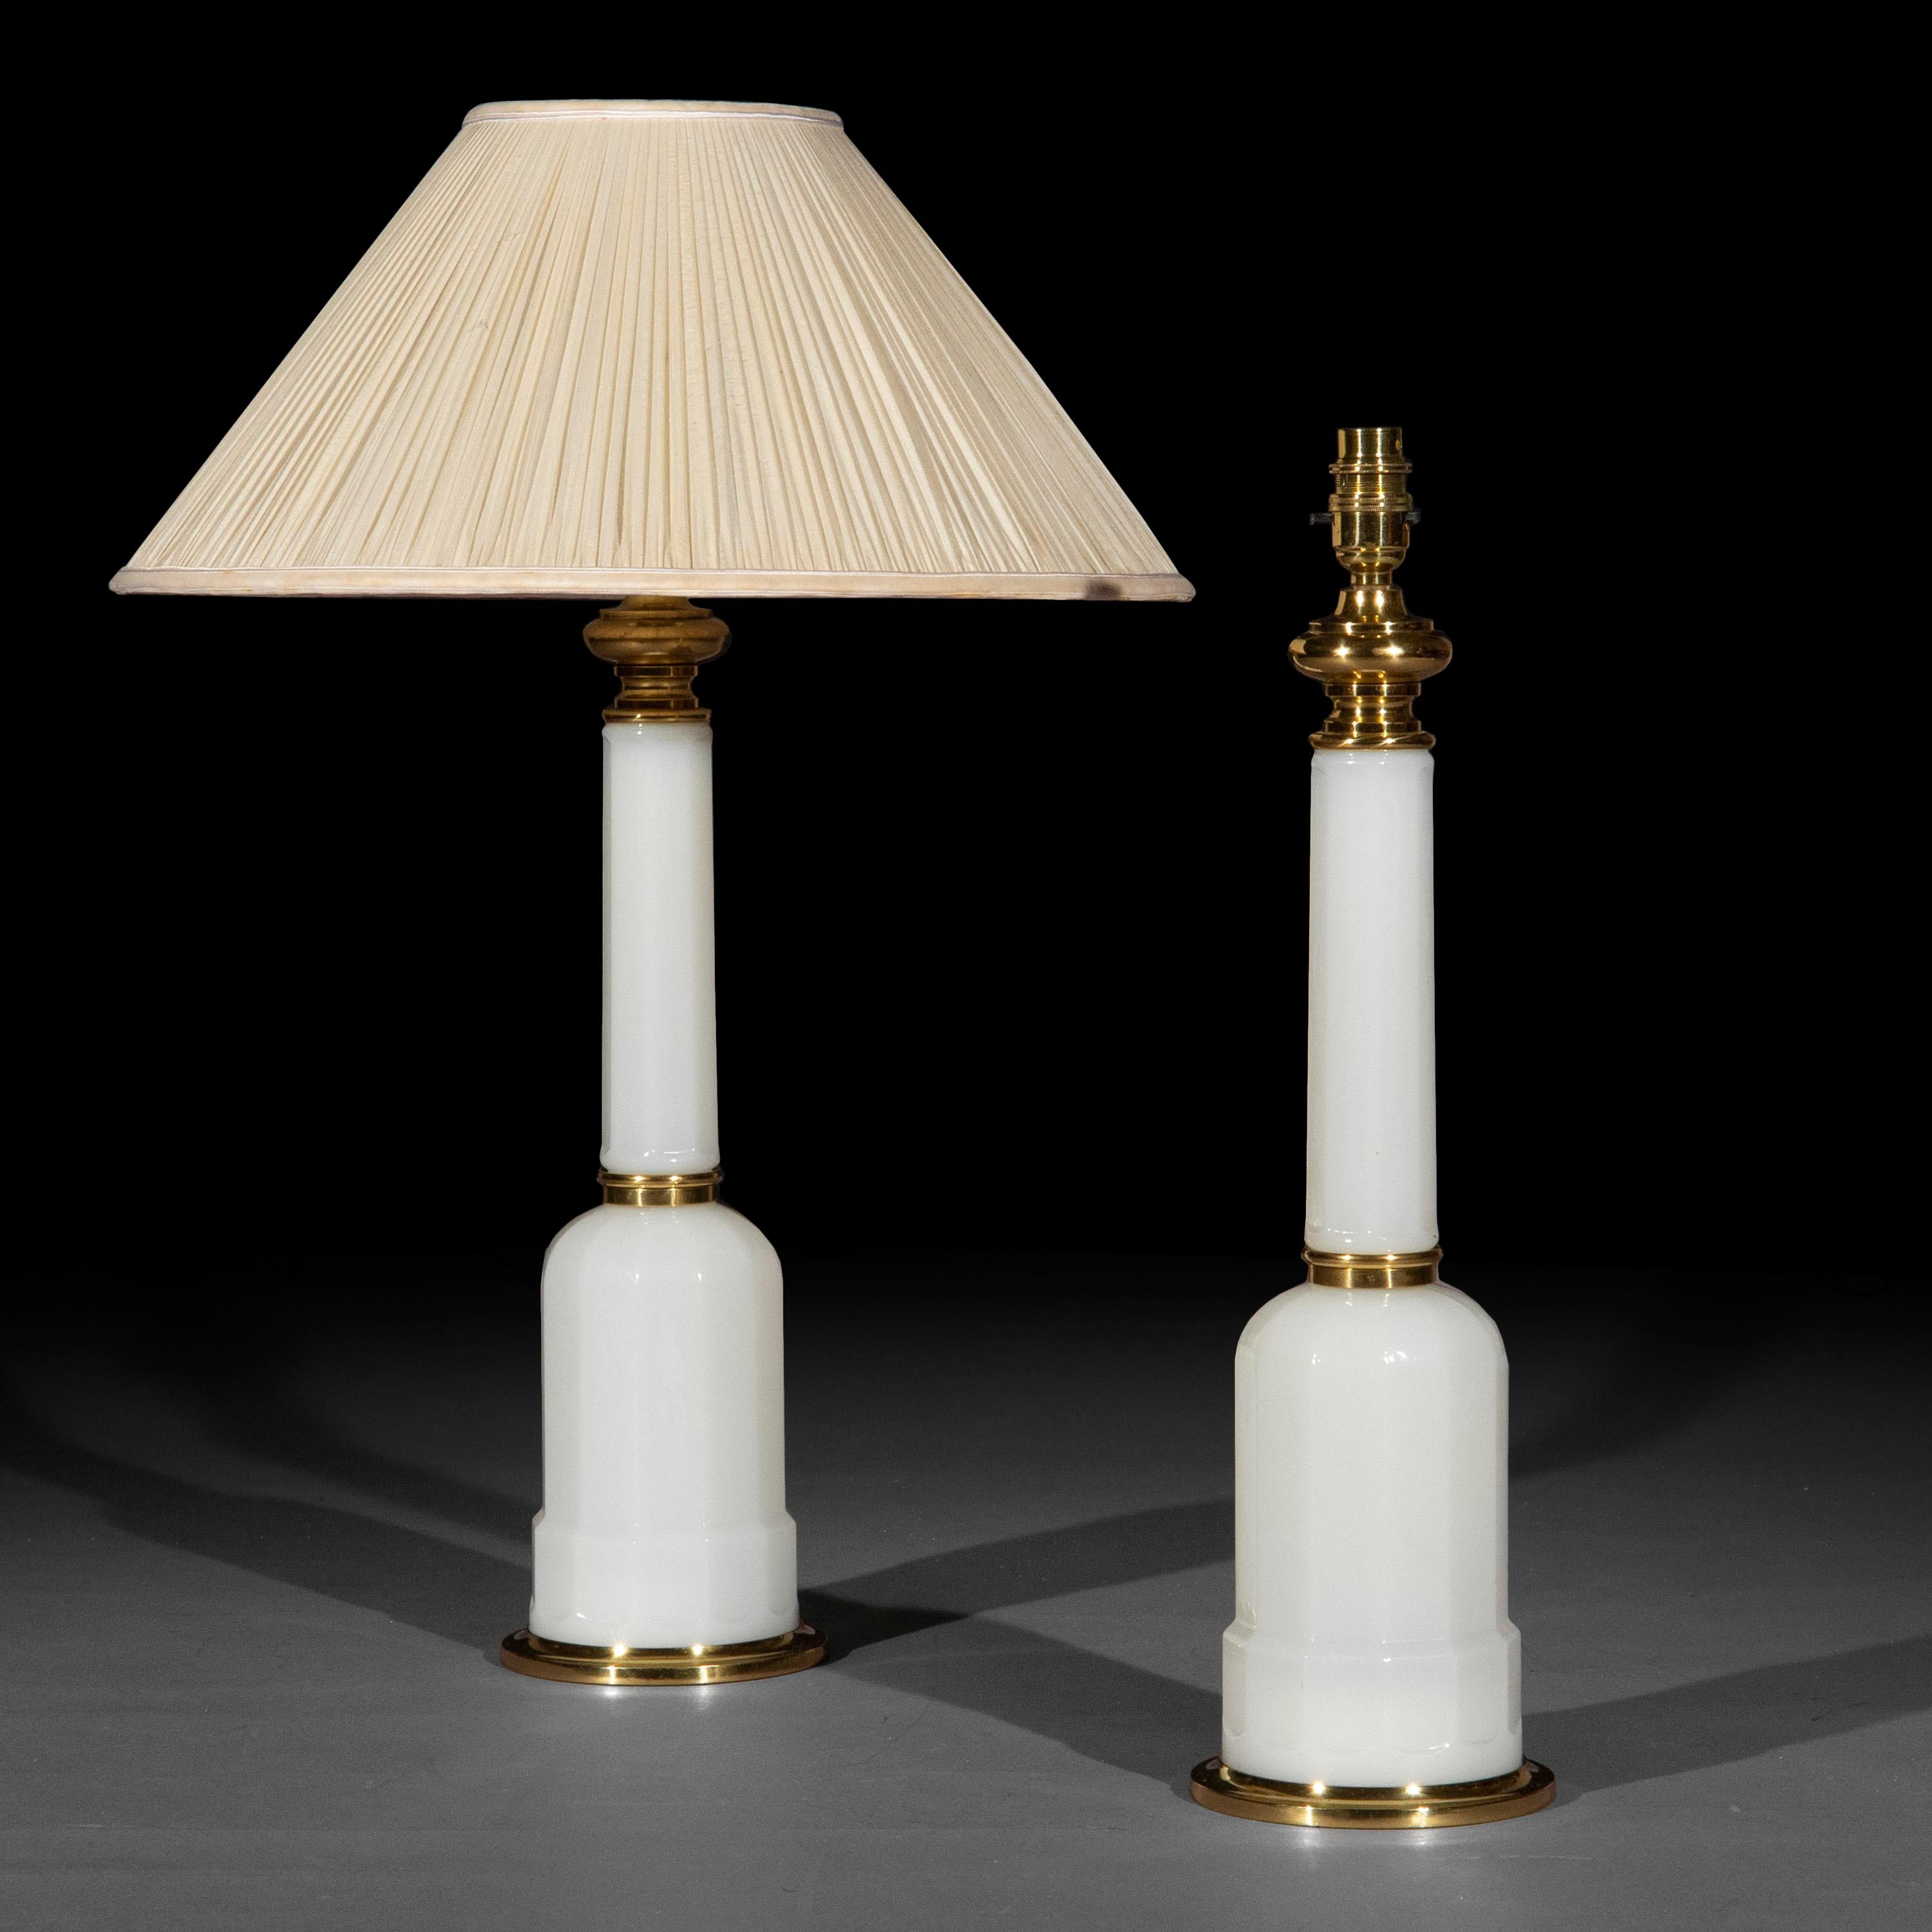 A stylish pair of white opaline glass and bass table lamps of superb quality, fashioned as 19th century oil lamps.

France, early to mid-20th century.

Why we like them
Their iconic, timeless design makes these lamps look understated and